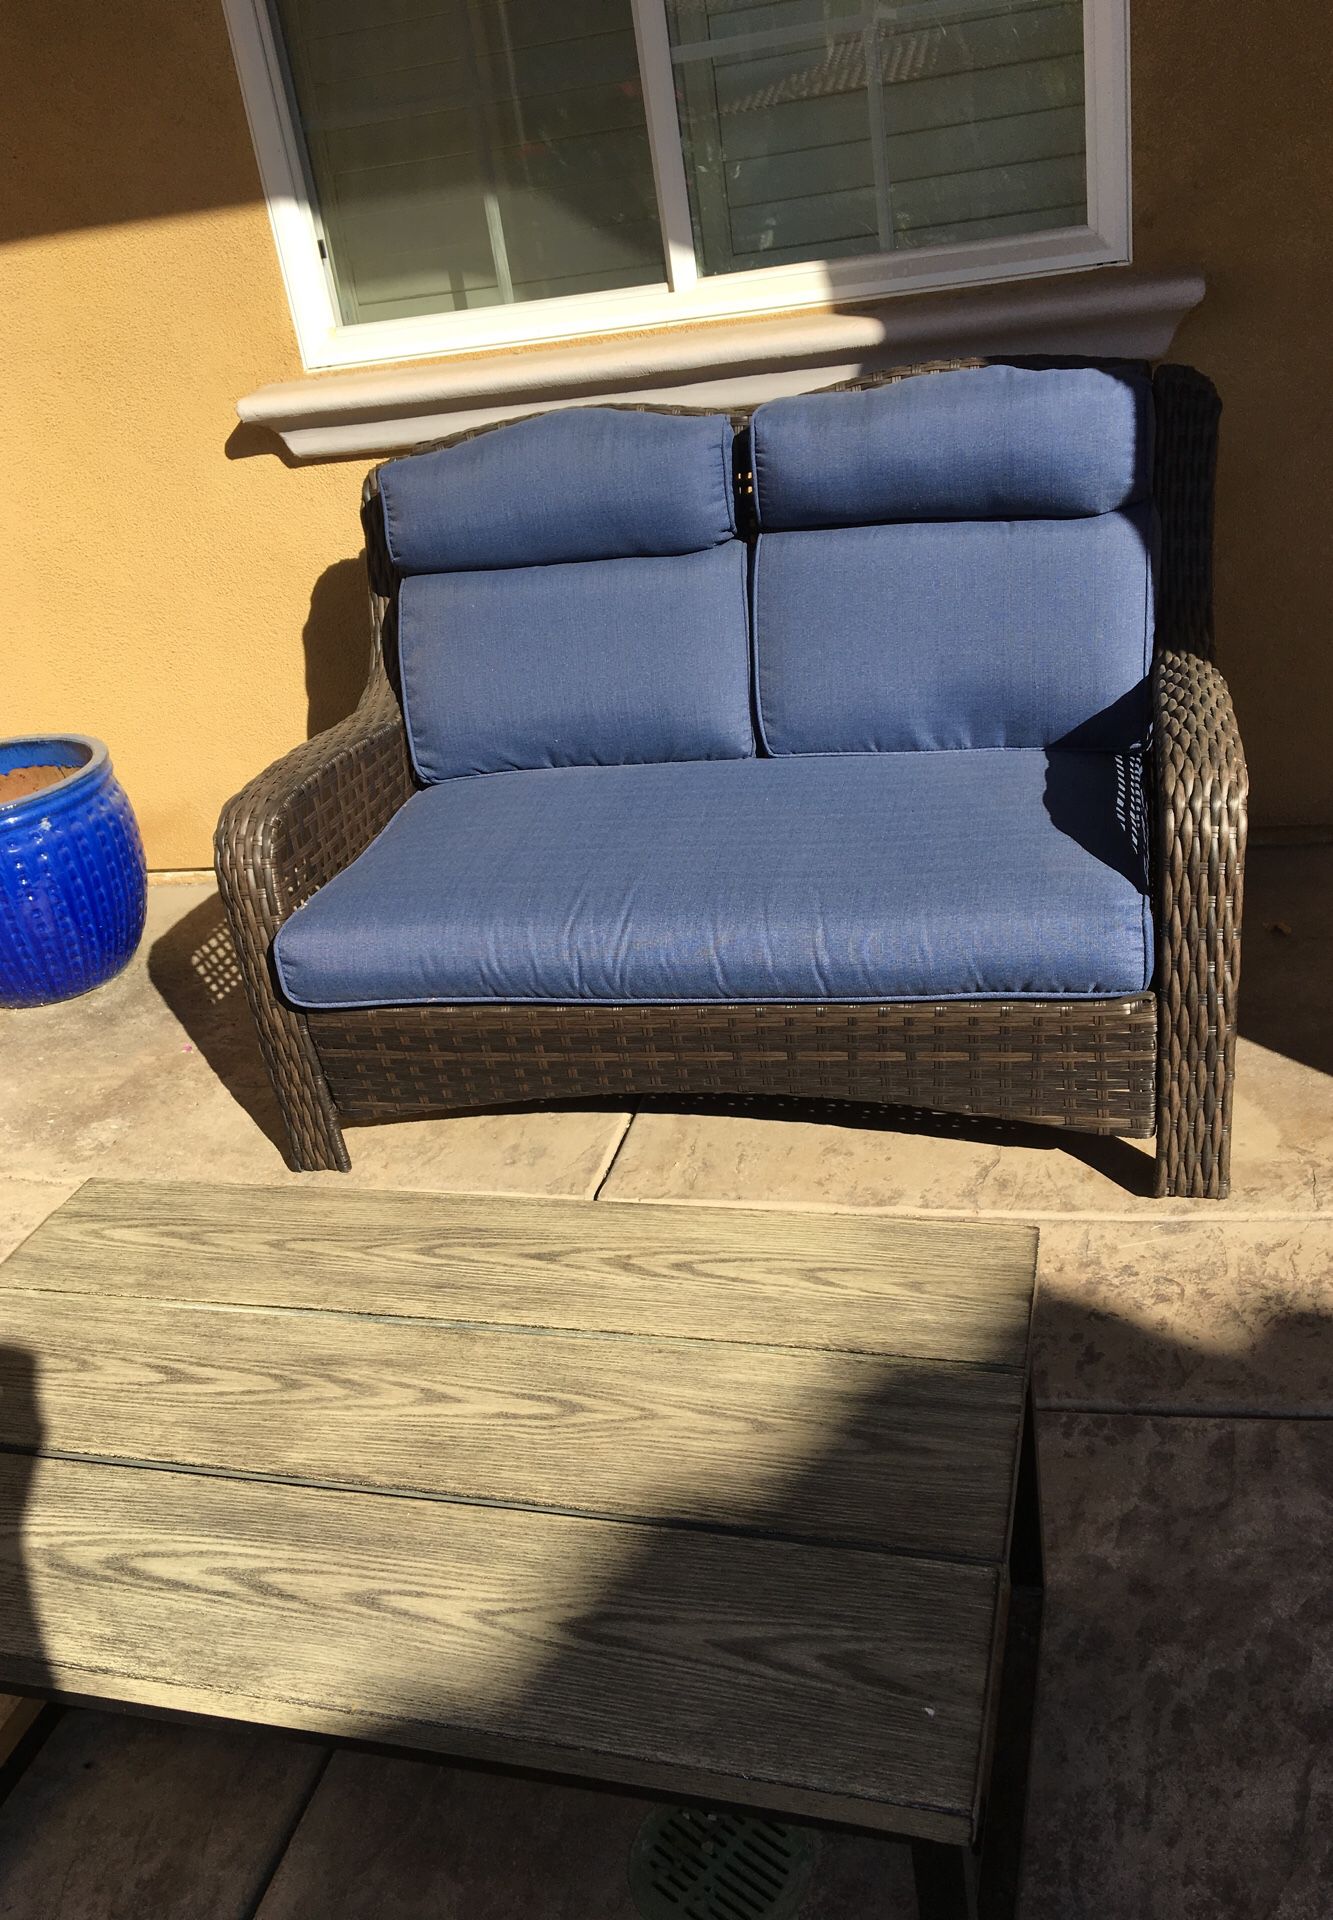 Patio furniture like new .. chair and table